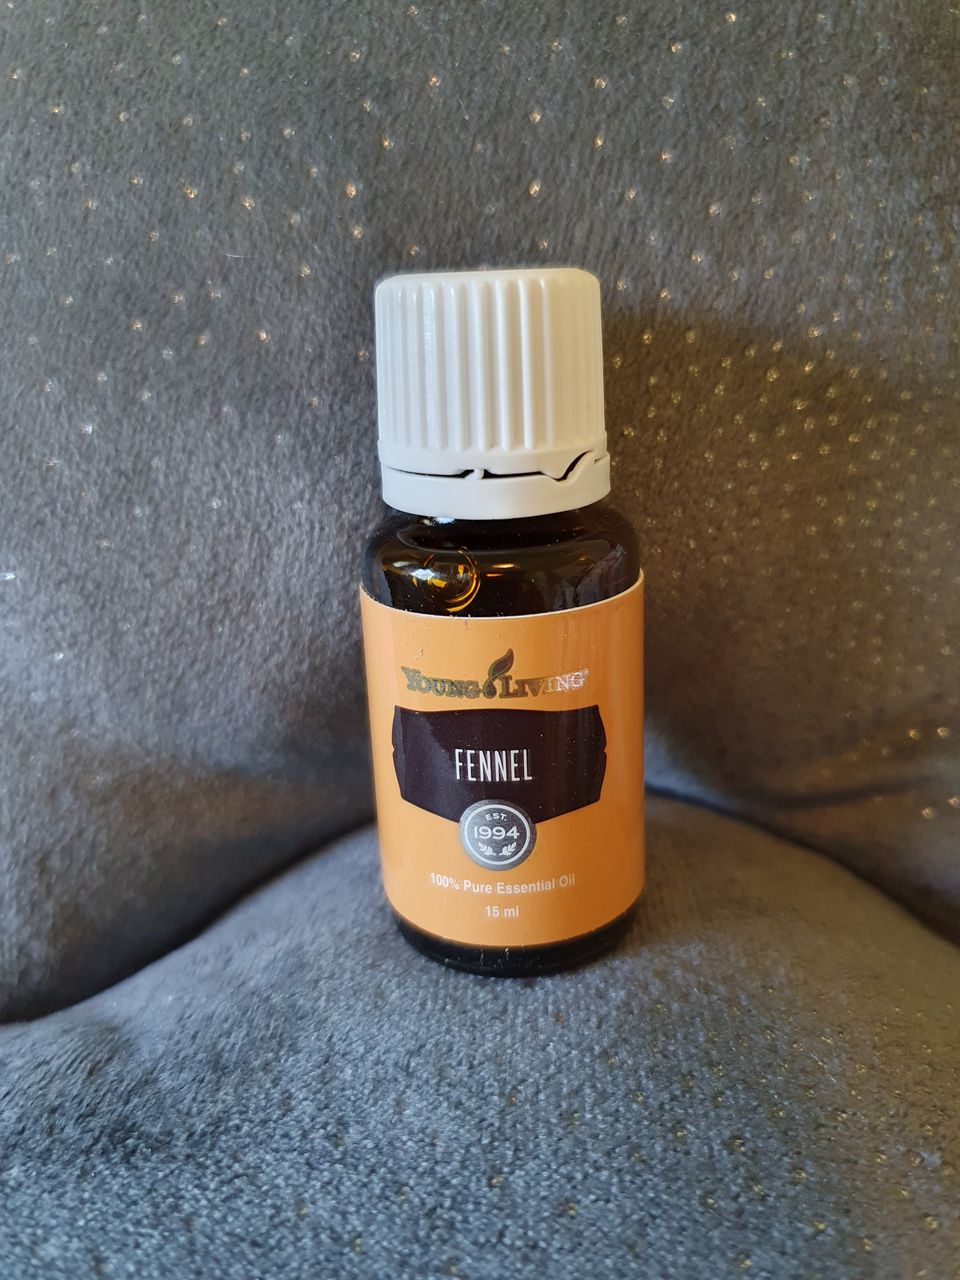 Fennel 15 ml young living